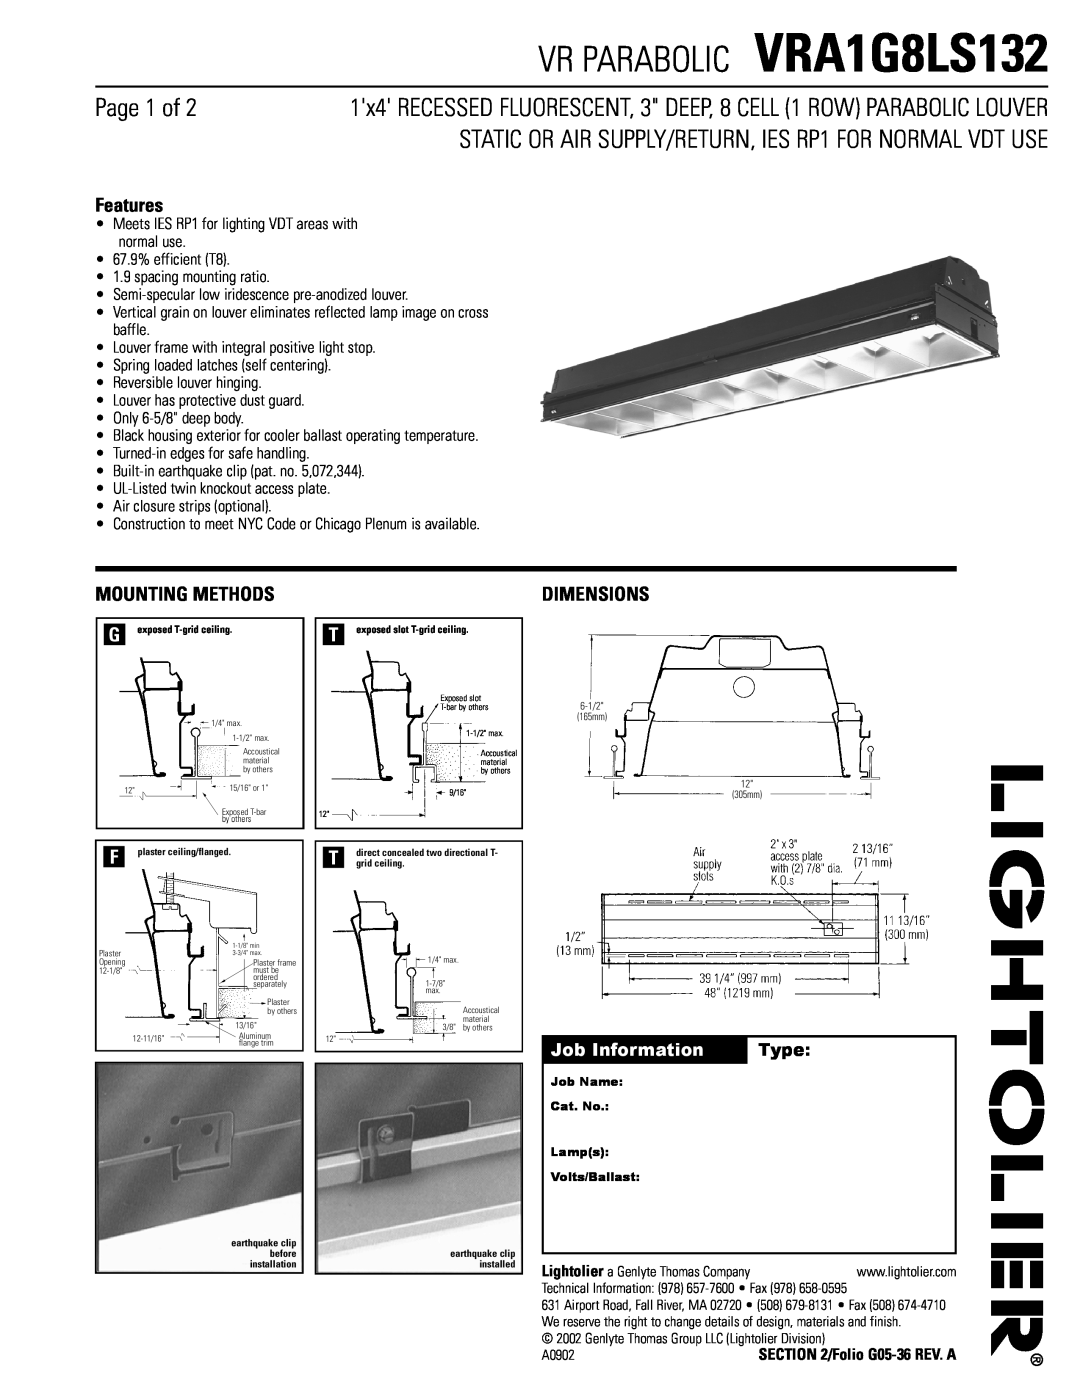 Lightolier dimensions VR PARABOLIC VRA1G8LS132, Page 1 of, Features, Mounting Methods, Dimensions, Job Information 